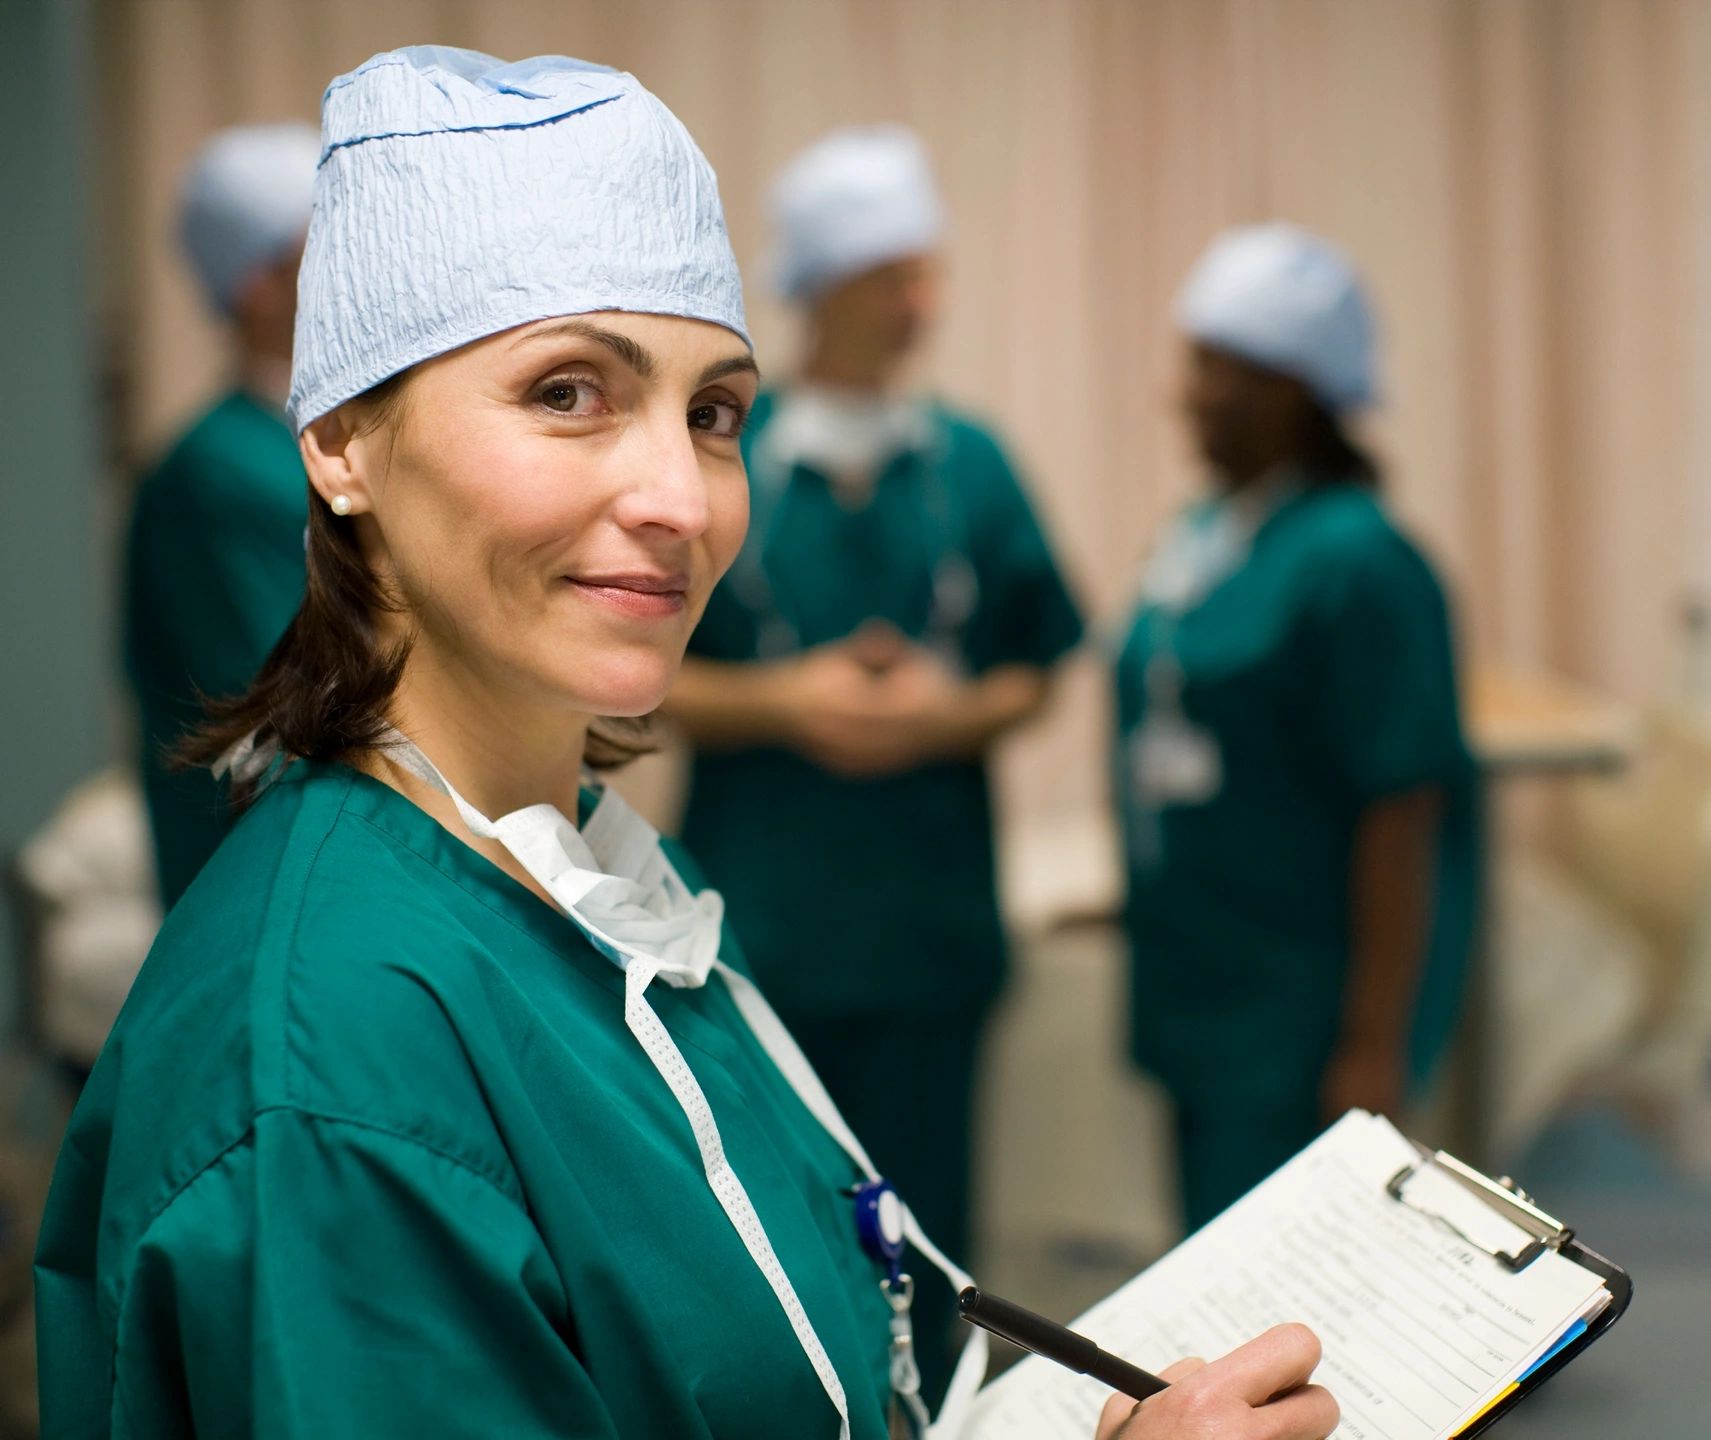 A doctor wearing scrubs is writing on a clipboard. She is smiling at the camera.